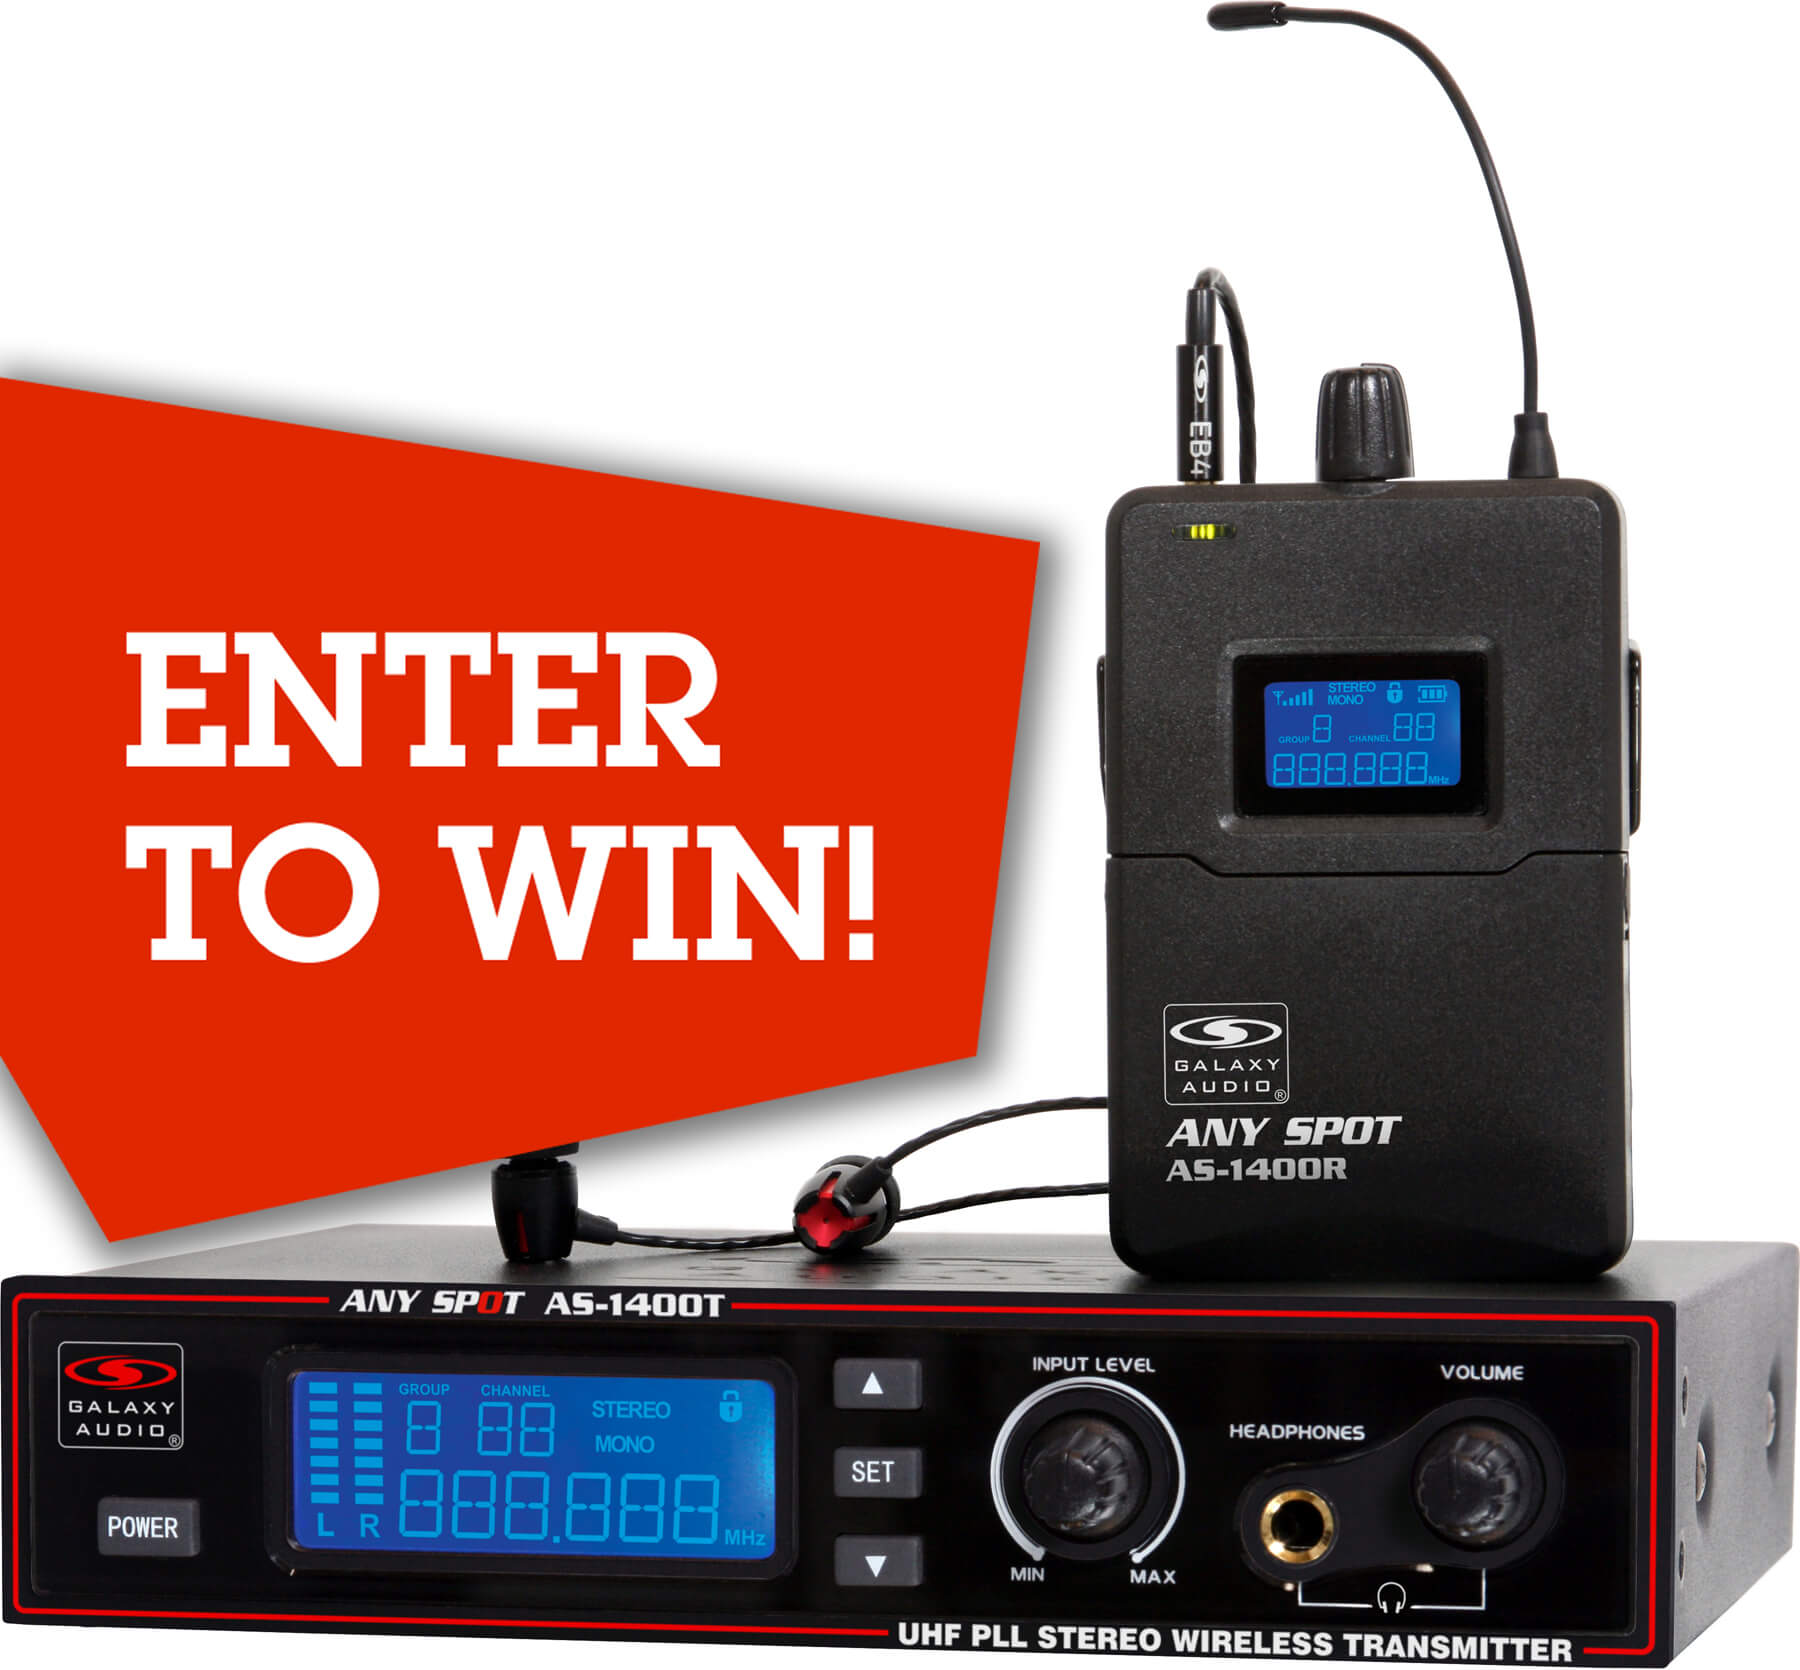 Enter to win a Galaxy Audio AS-1400 Wireless Personal Monitor System